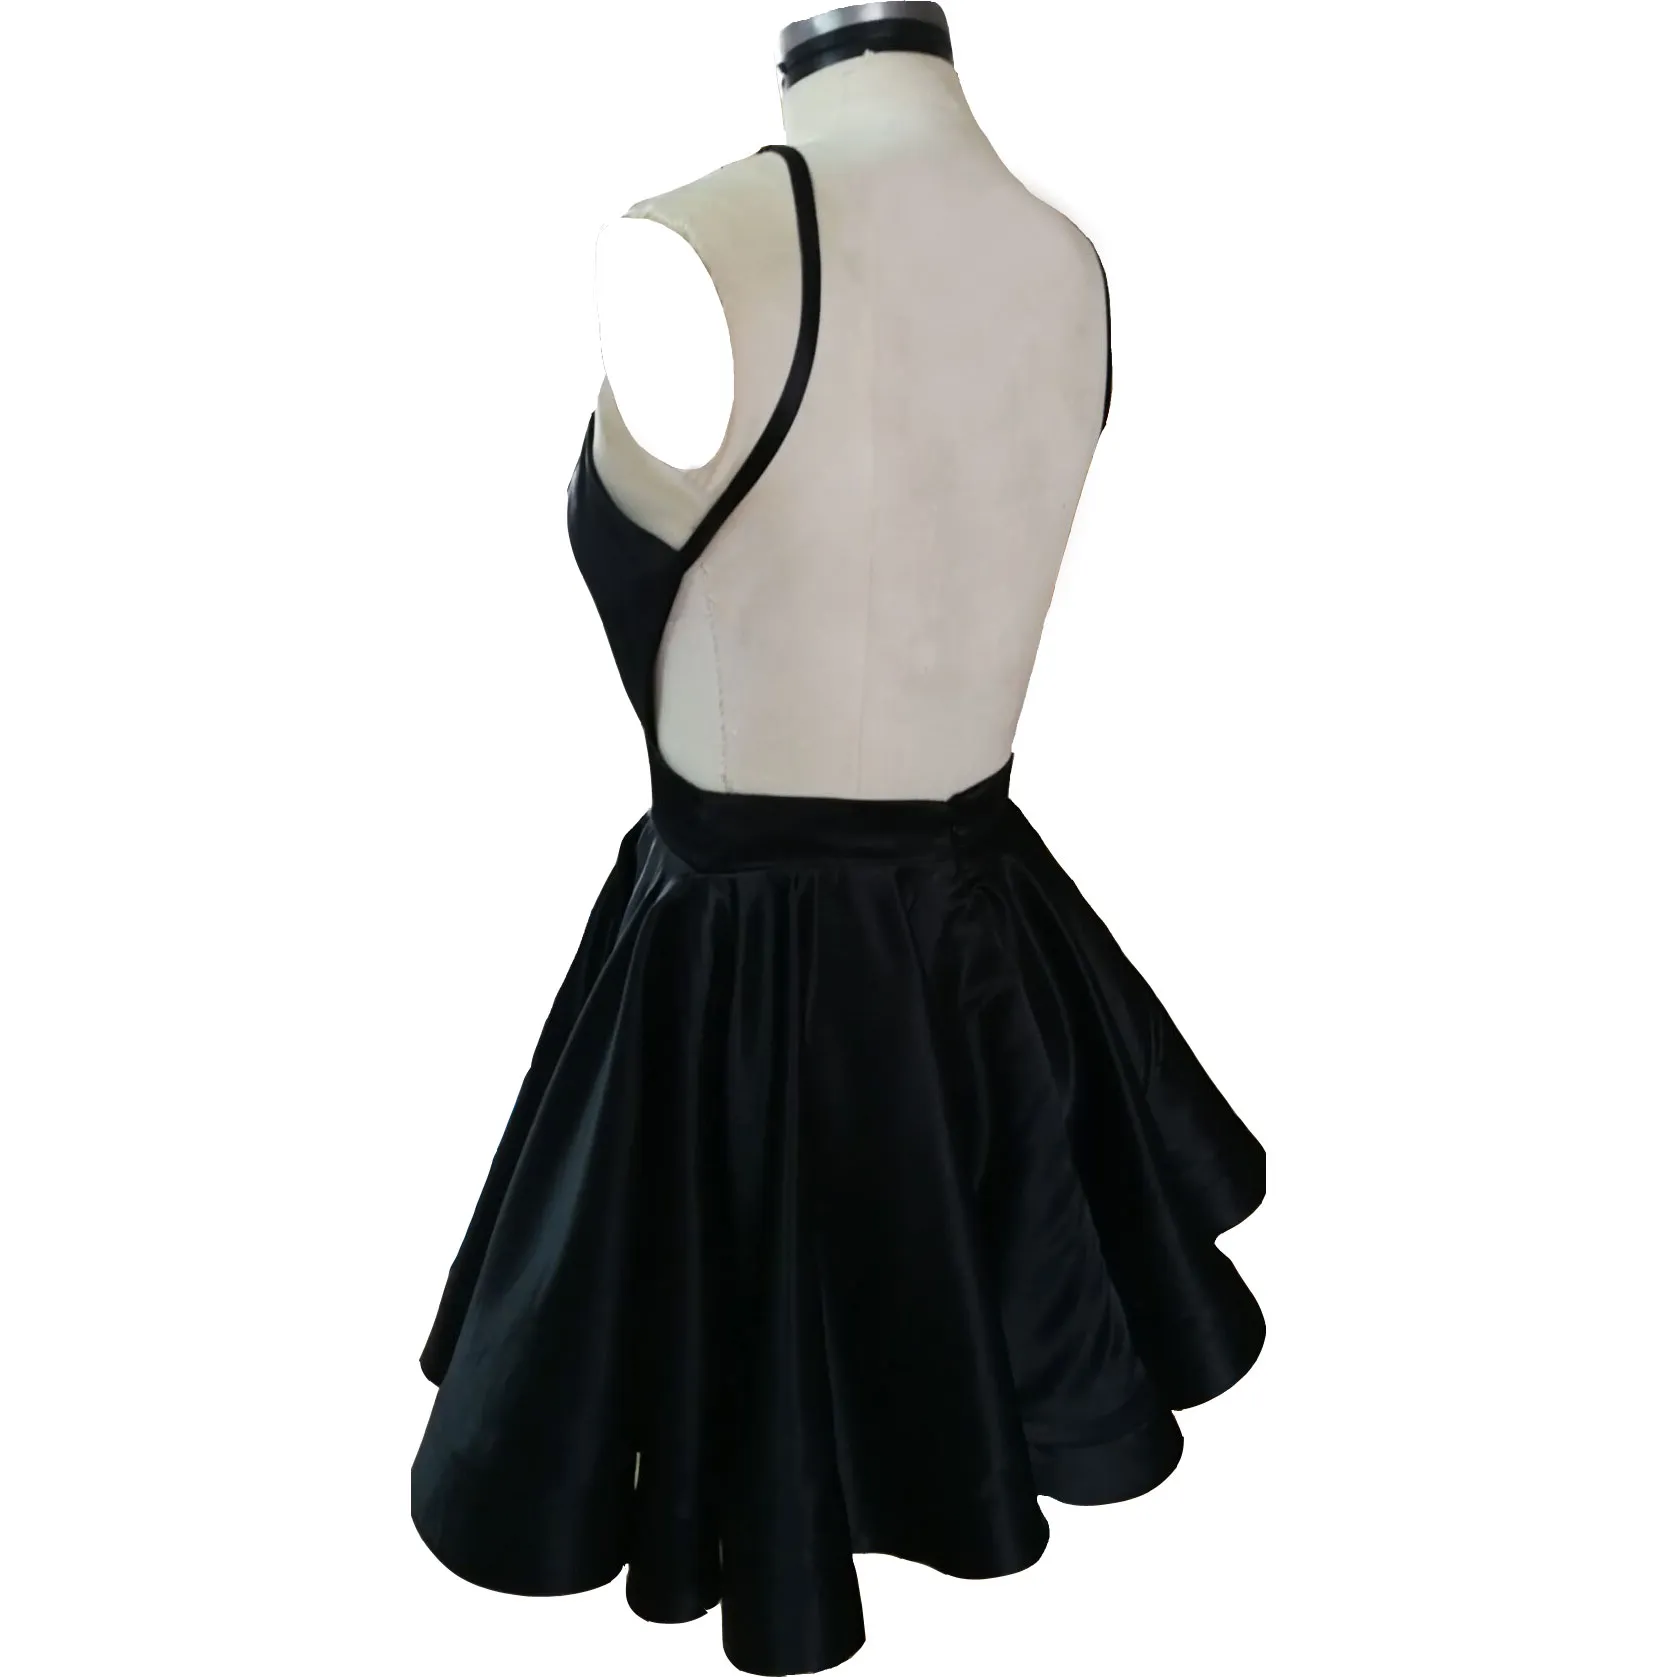 Selling Short Black Backless Prom Dresses Homecoming Dresses Short Dress for Women Party Gowns Under 1003196462